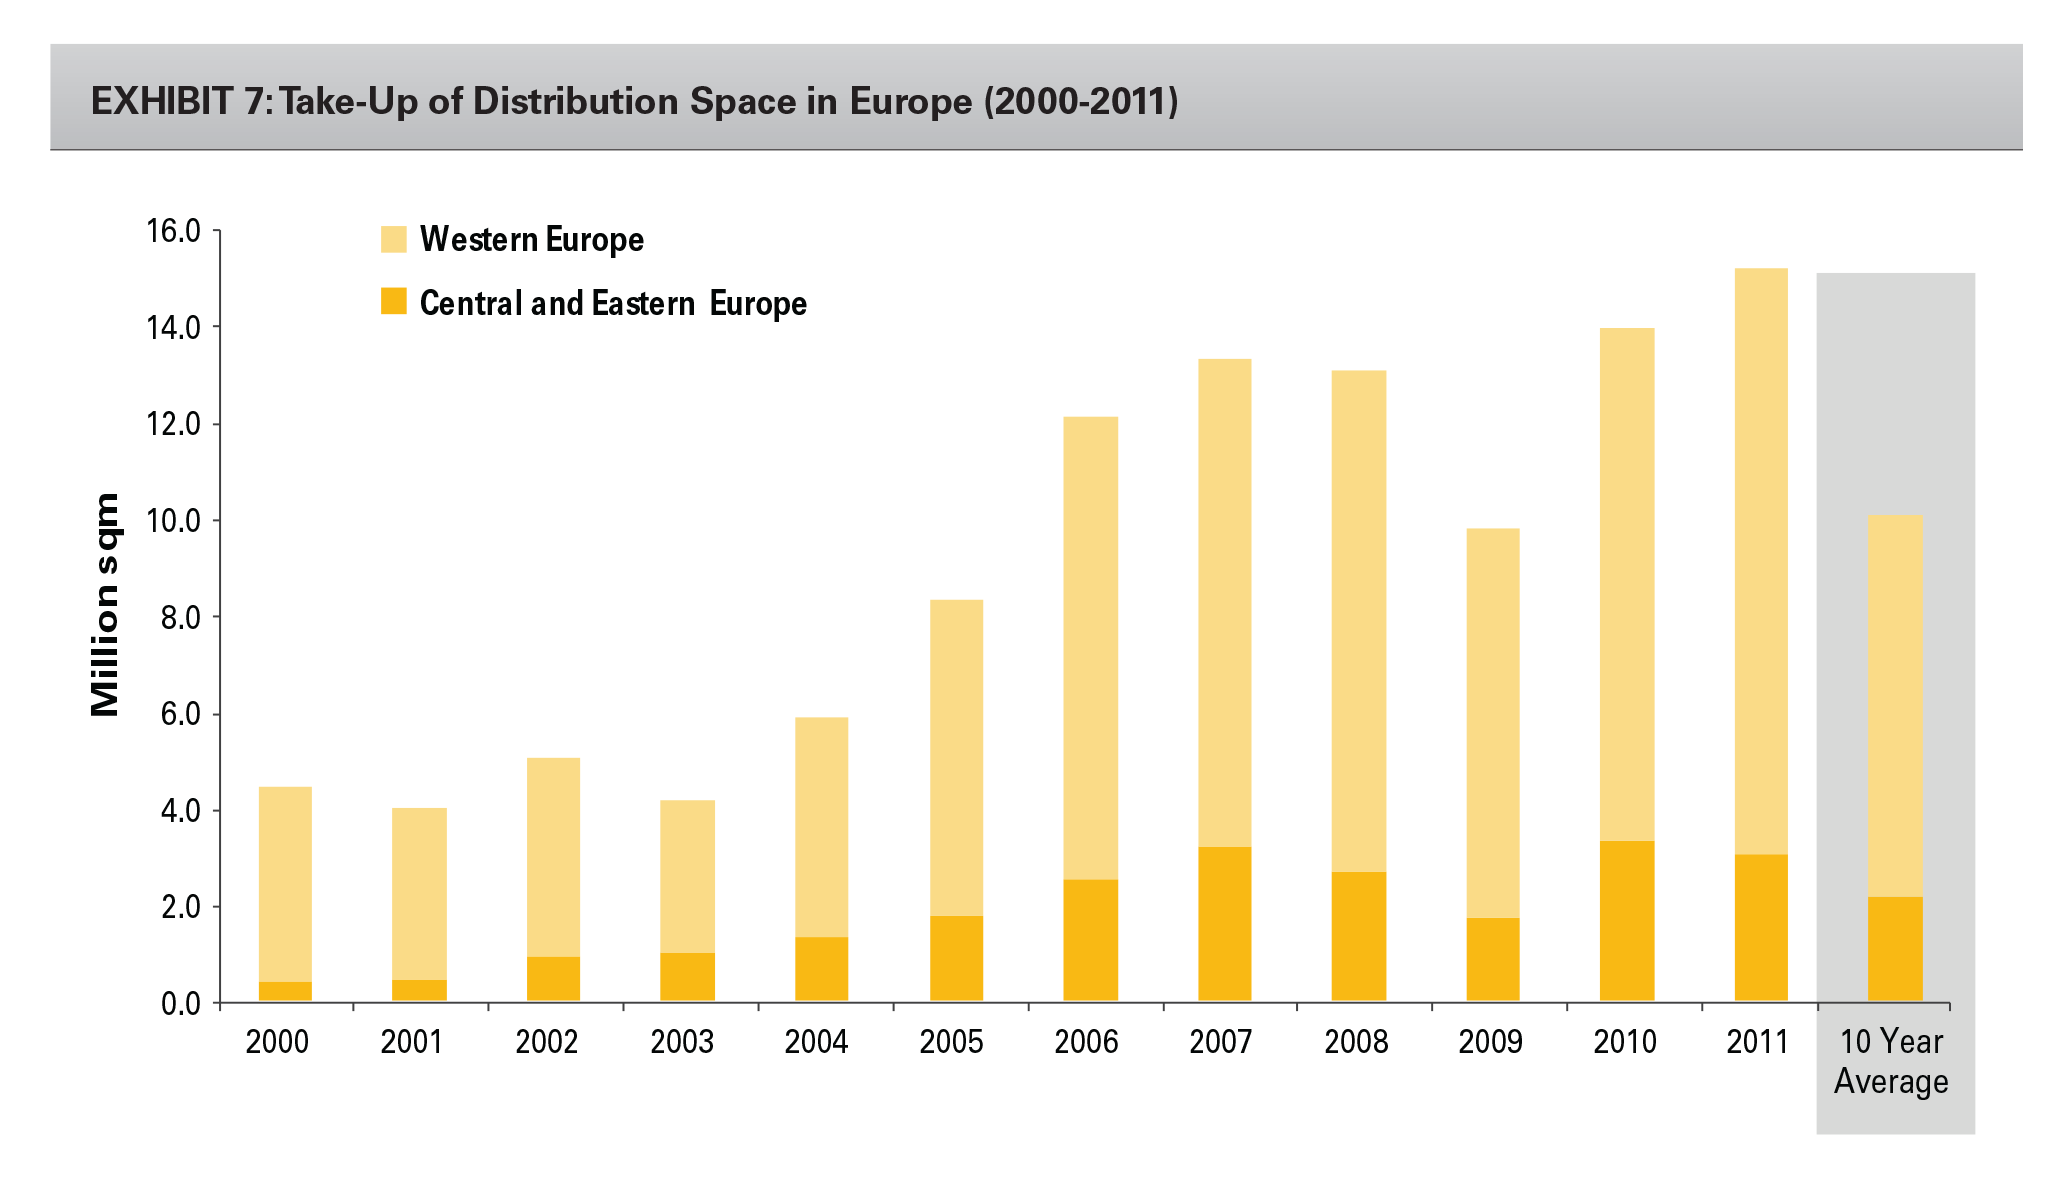 EXHIBIT 7: Take-Up of Distribution Space in Europe (2000-2011)